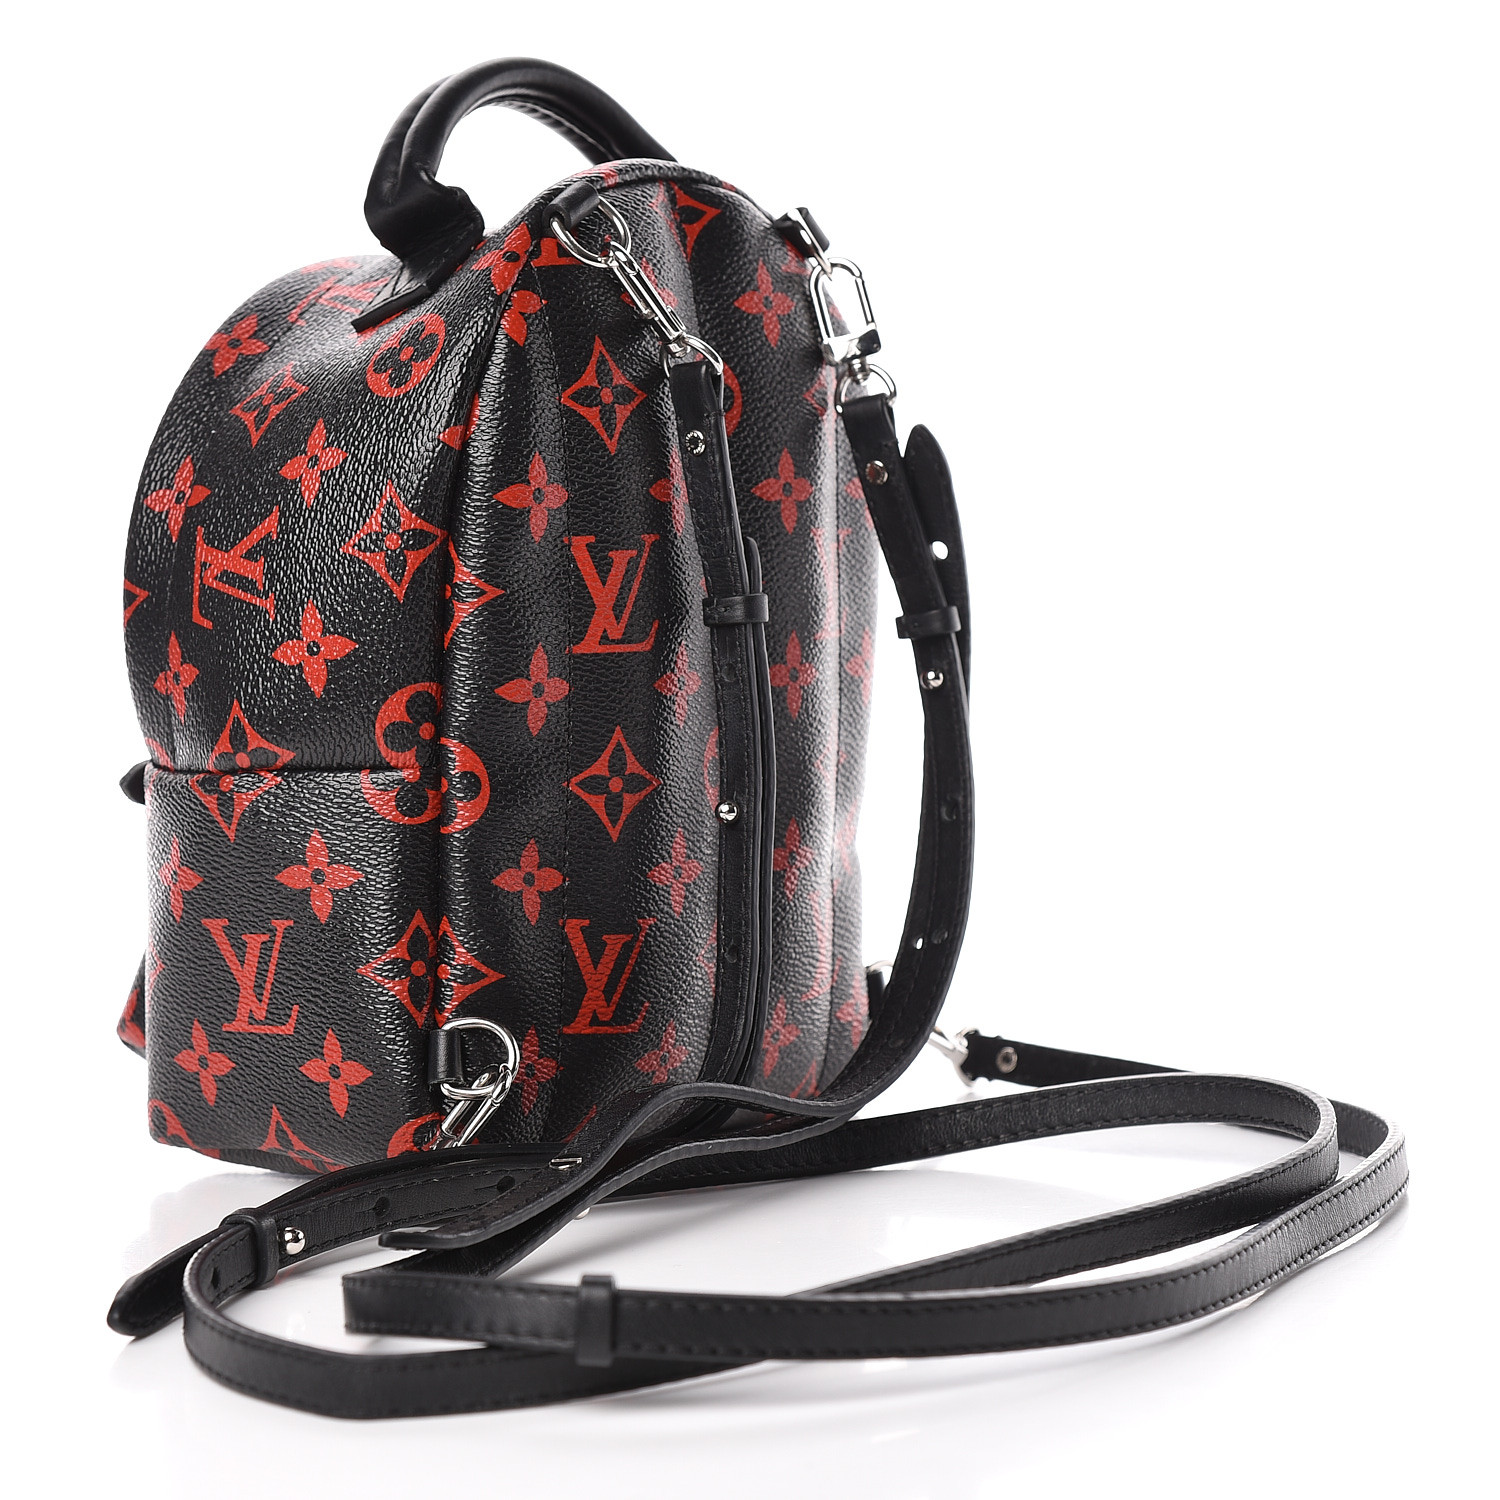 Louis Vuitton Launches Red and Black Monogram Infrarouge